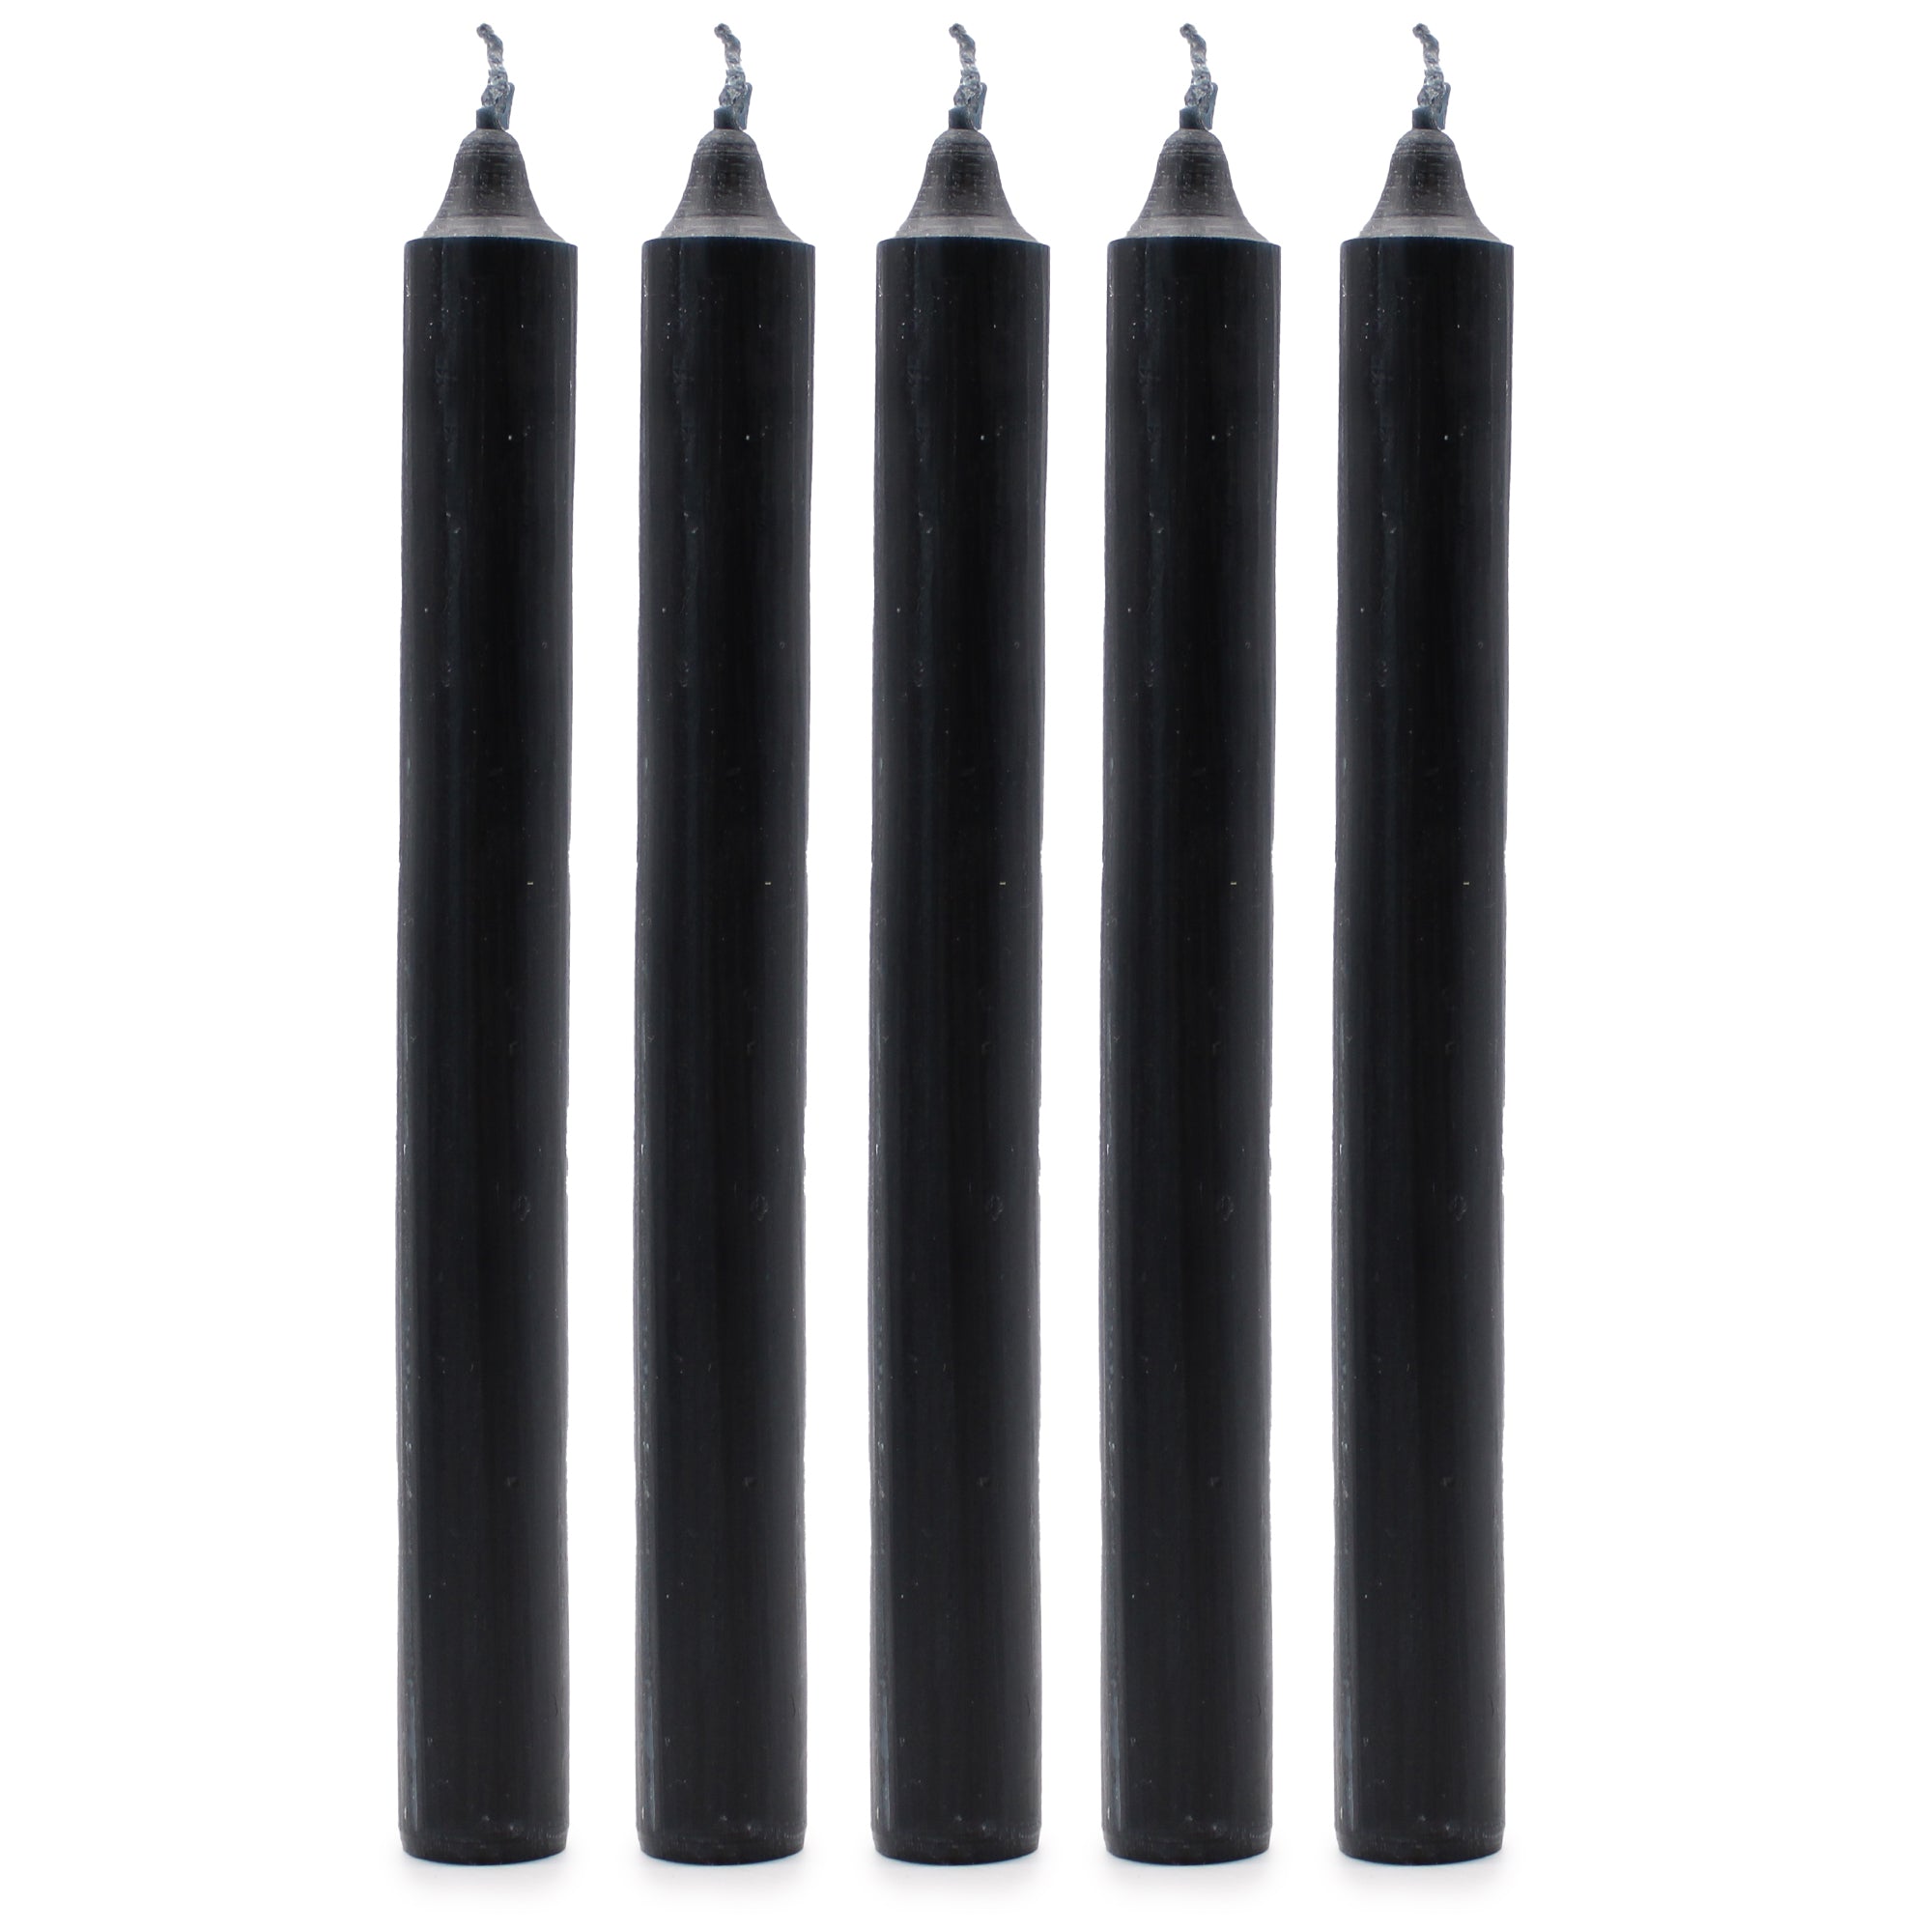 View Solid Colour Dinner Candles Rustic Black Pack of 5 information